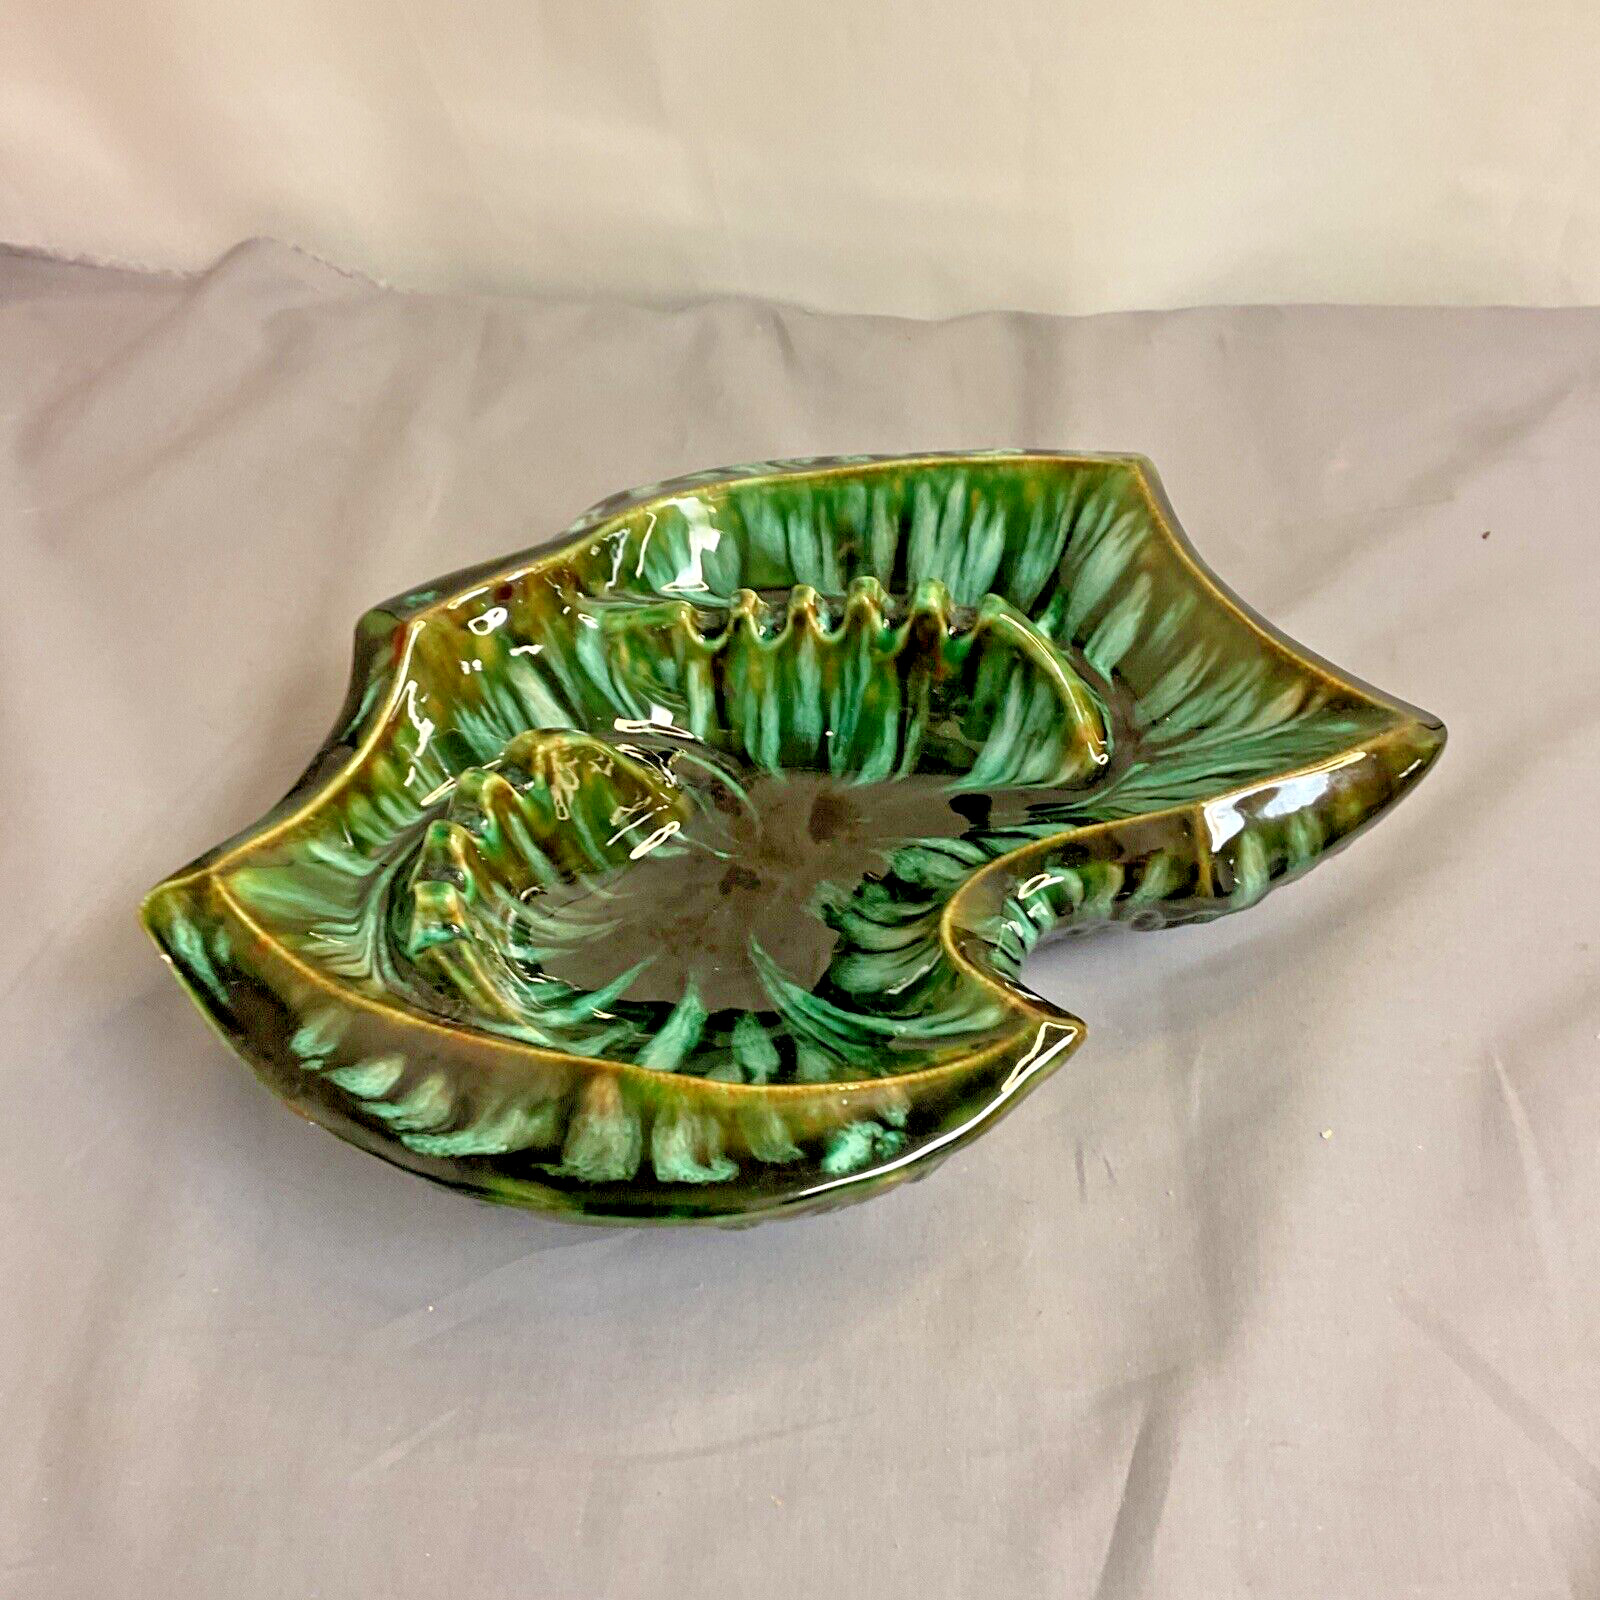 Vintage Retro Ashtray Large Green Floral Funky Design Ceramic High Glossy